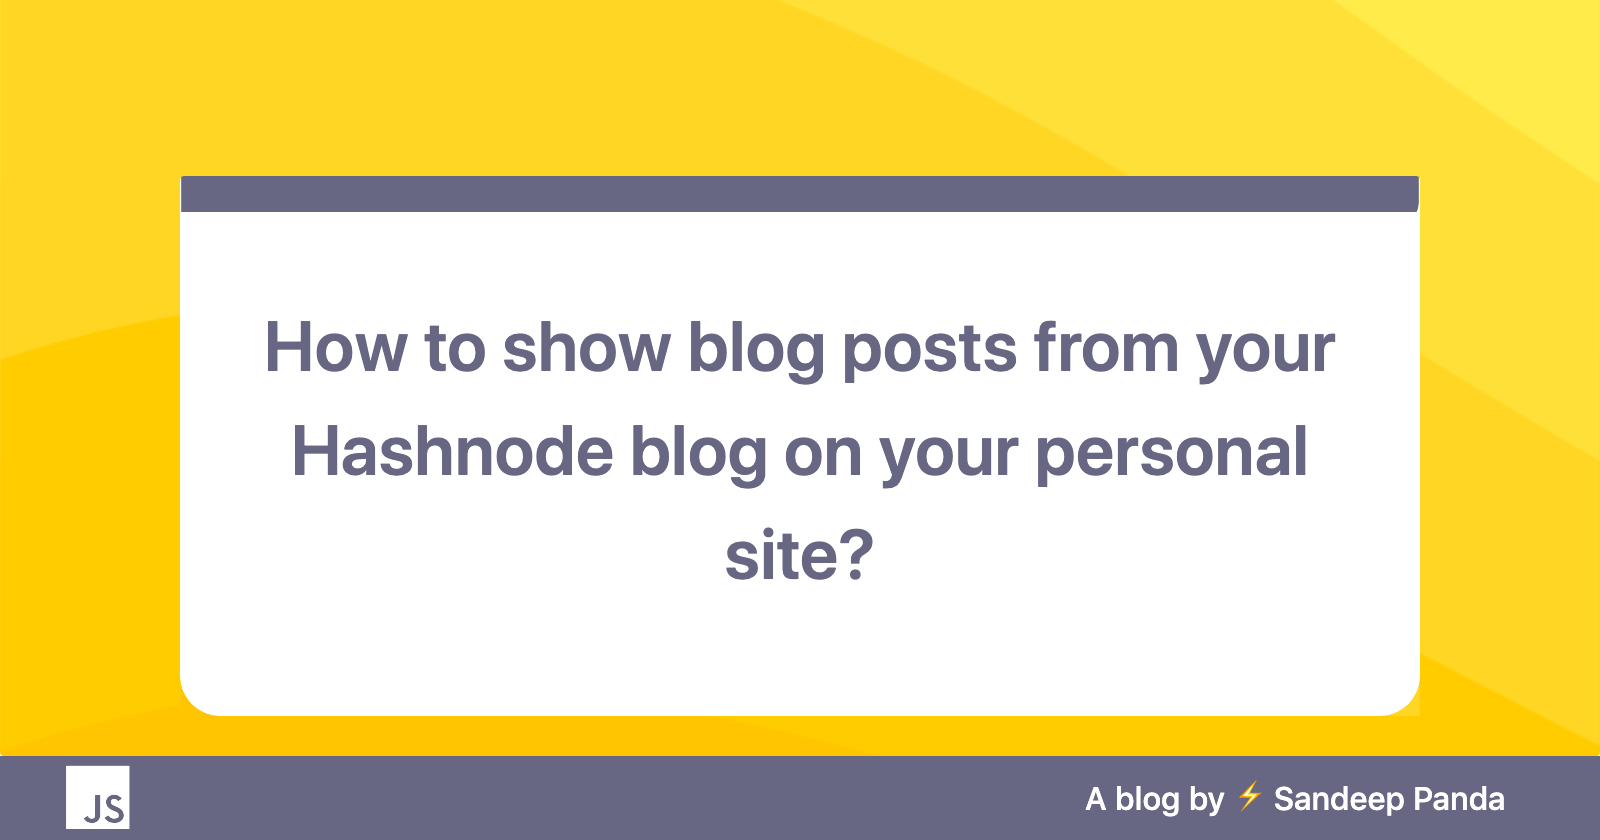 Cover Image for How to show blog posts from your Hashnode blog on your personal site?